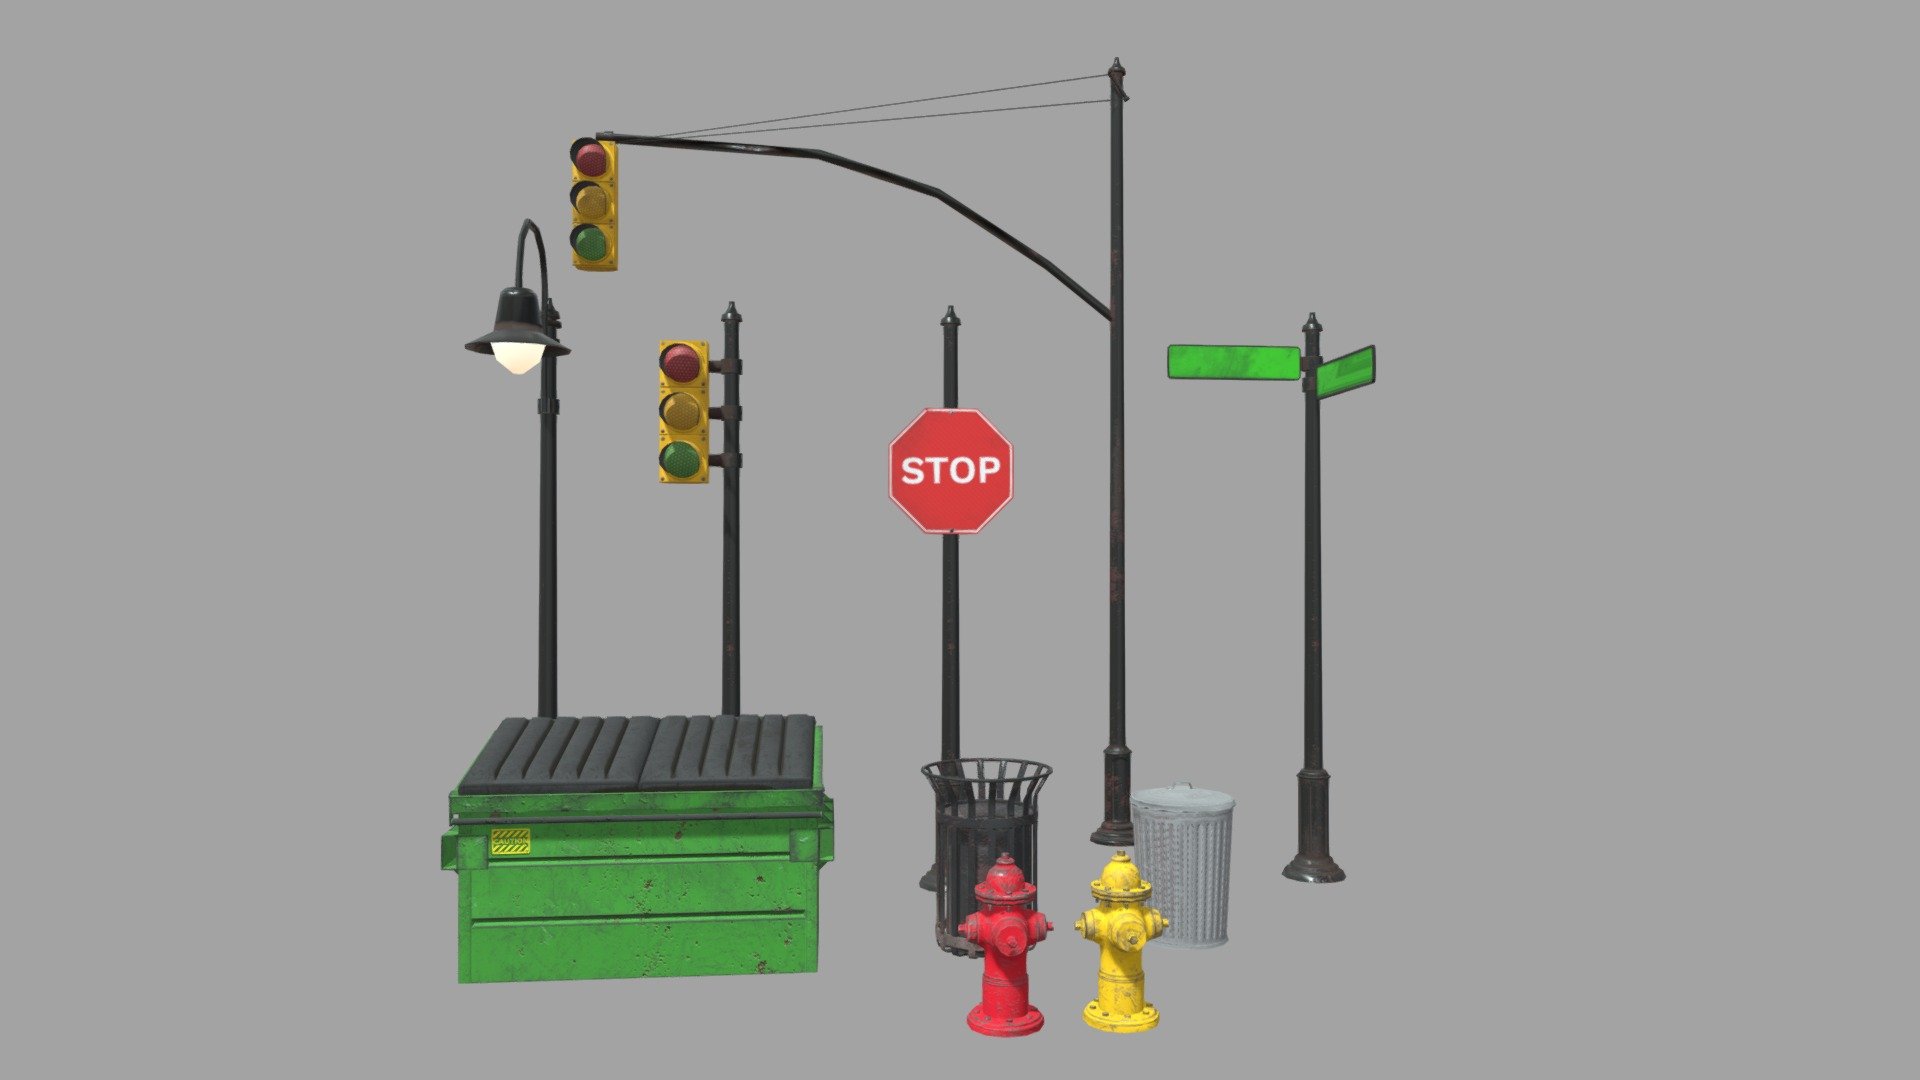 Street and city props. Dumpster, Traffic Lights, Street Lamp, Fire Hydrants, Stop Sign, Trash Cans, and Street Sign. These props were modeled to be in a multiplayer fps map. All the meshes use the same material. Meshes were modeled in Blender and textured in Substance Painter 3d model